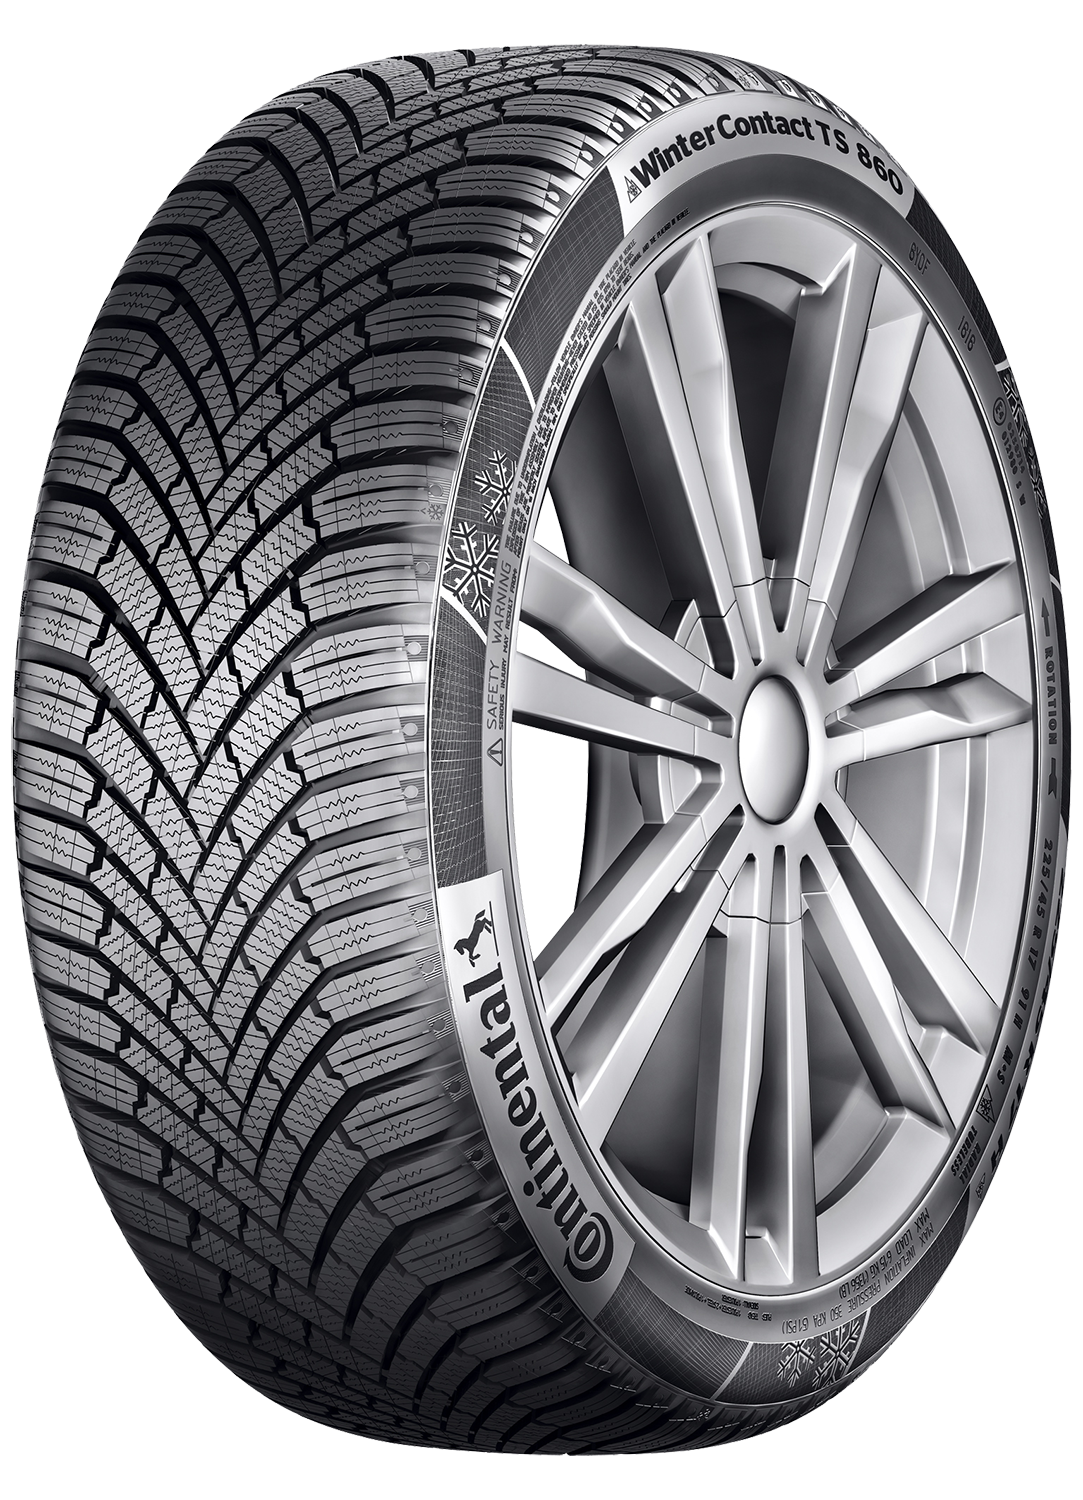 Winter car Continental AG Continental - tires from